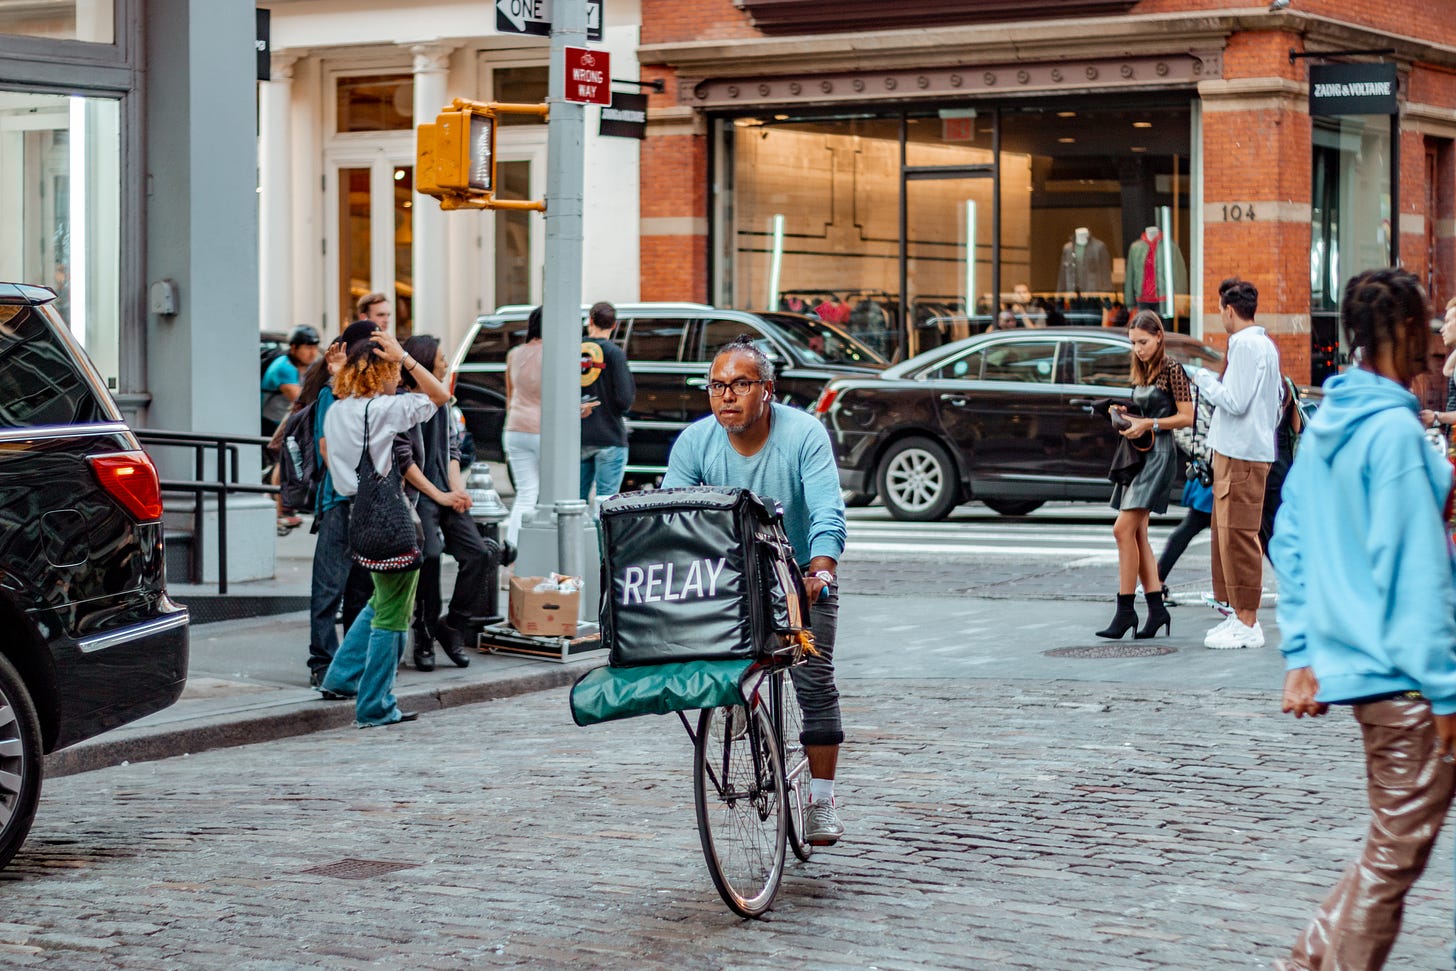 A Relay delivery man on his bicycle in New York: A photo by David Elikwu 